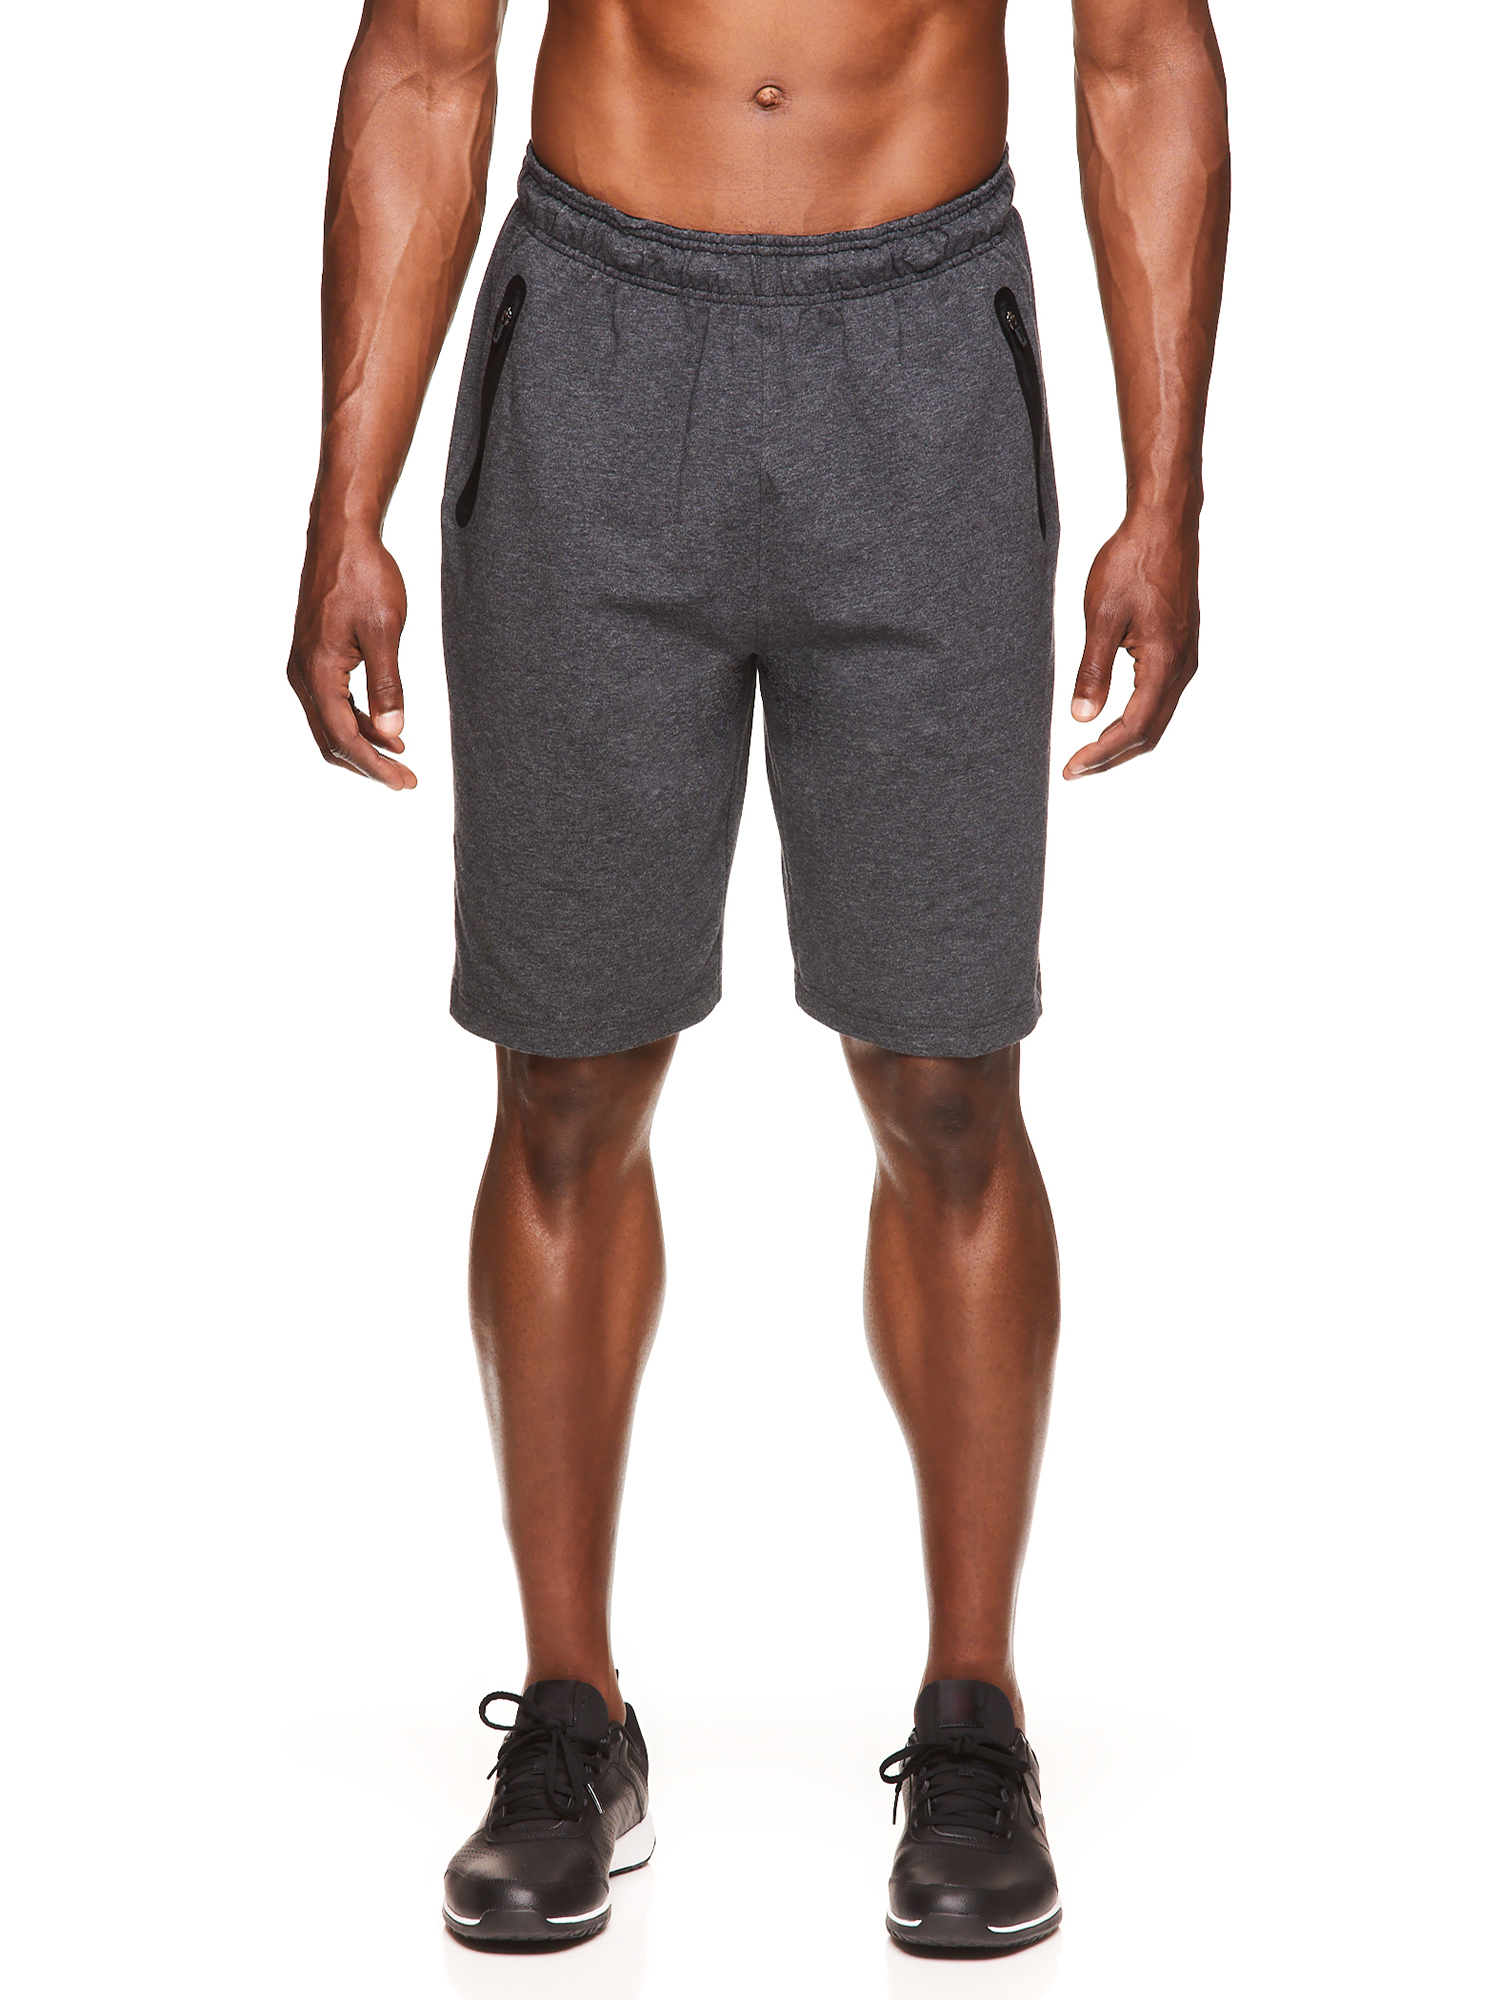 Reebok Men's and Big Men's Active Tech Terry Shorts, 10" Inseam Basketball Shorts, up to Size 3XL - image 1 of 4